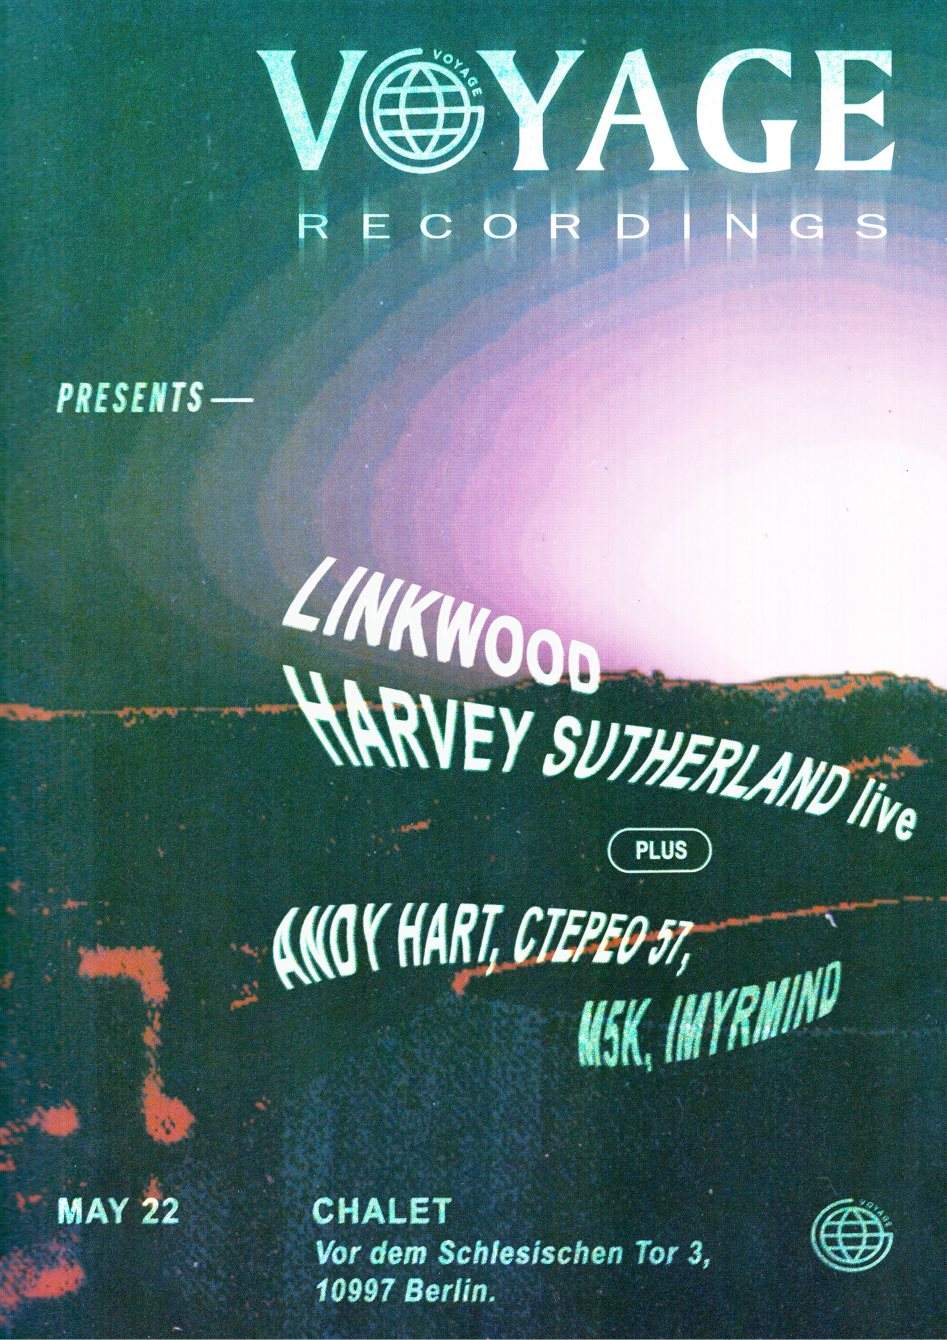 Voyage Recordings with Linkwood, Harvey Sutherland (Live) & Andy Hart - Página frontal